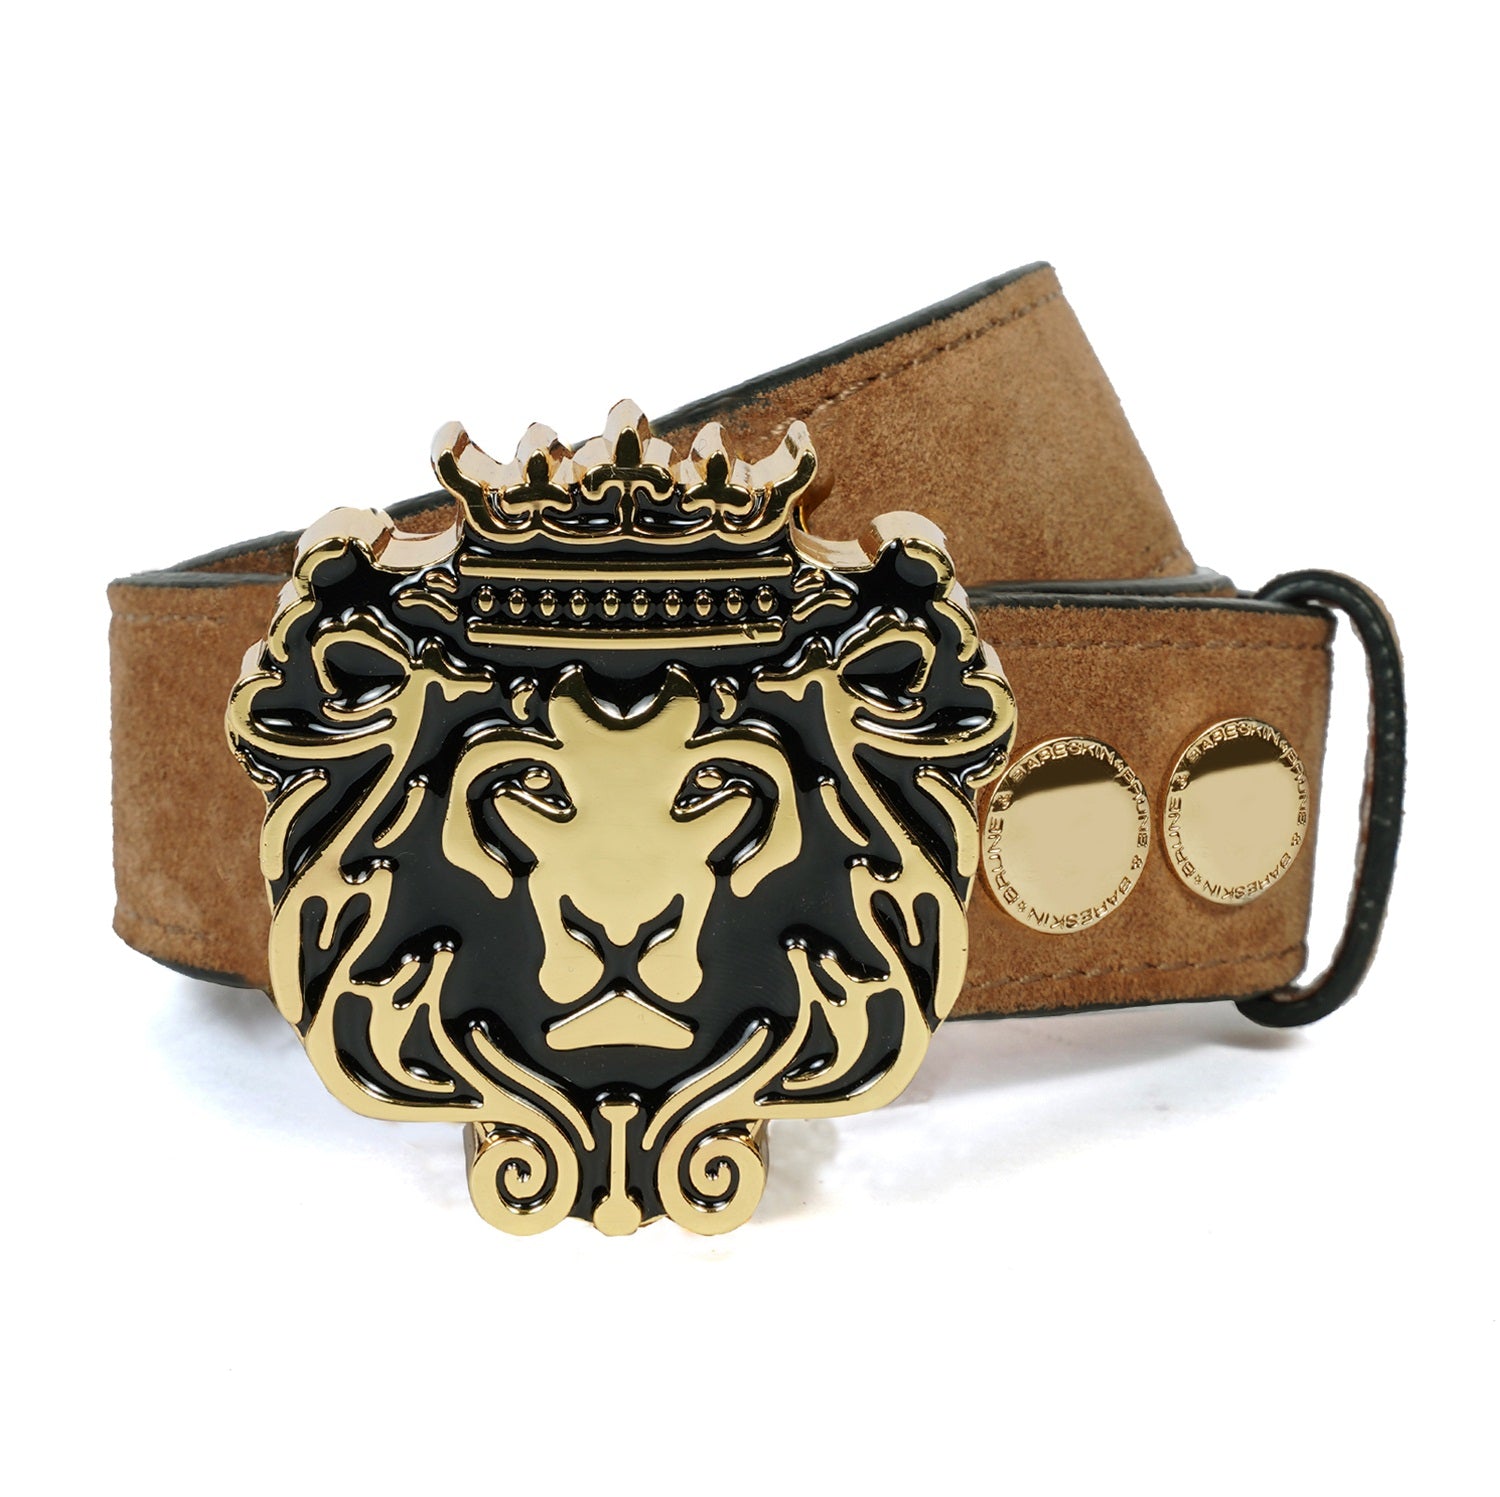 Premium Photo | A silver and gold purse with a lion head on the front.